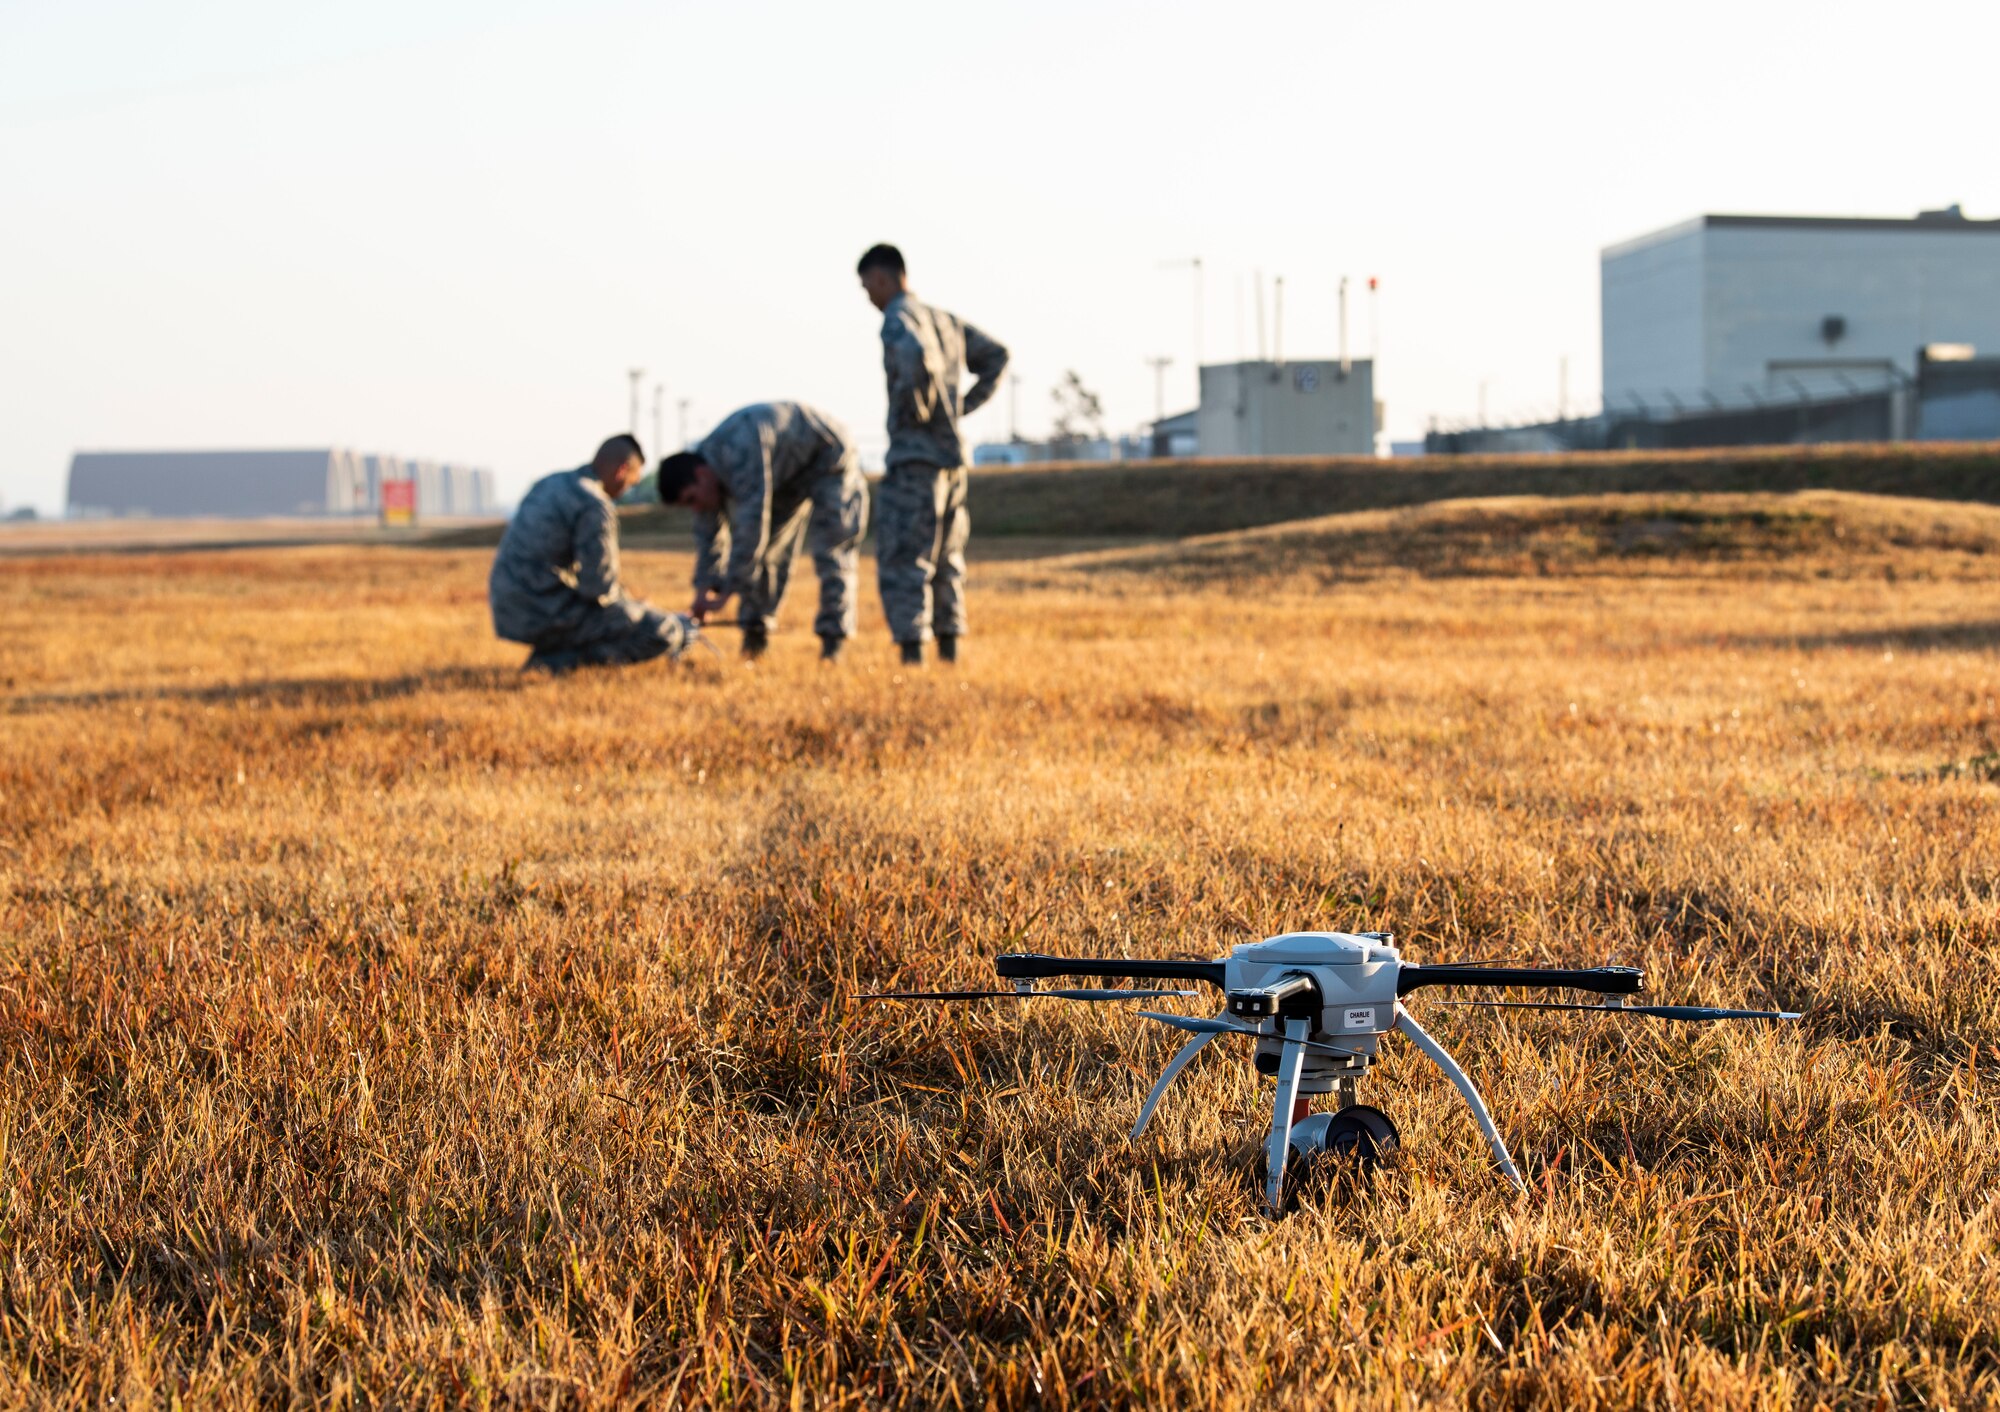 U.S. Air Force engineering technicians from the 8th Civil Engineer Squadron, replace the battery of a quadcopter at Kunsan Air Base, Republic of Korea, Nov. 2, 2018. The 8th CES is piloting a Rapid Airfield Damage Assessment System program to see how viable utilizing small unmanned aerial systems will be, instead of sending personnel into potentially hazardous environments to survey damage to the base. (U.S. Air Force photo by Senior Airman Stefan Alvarez)